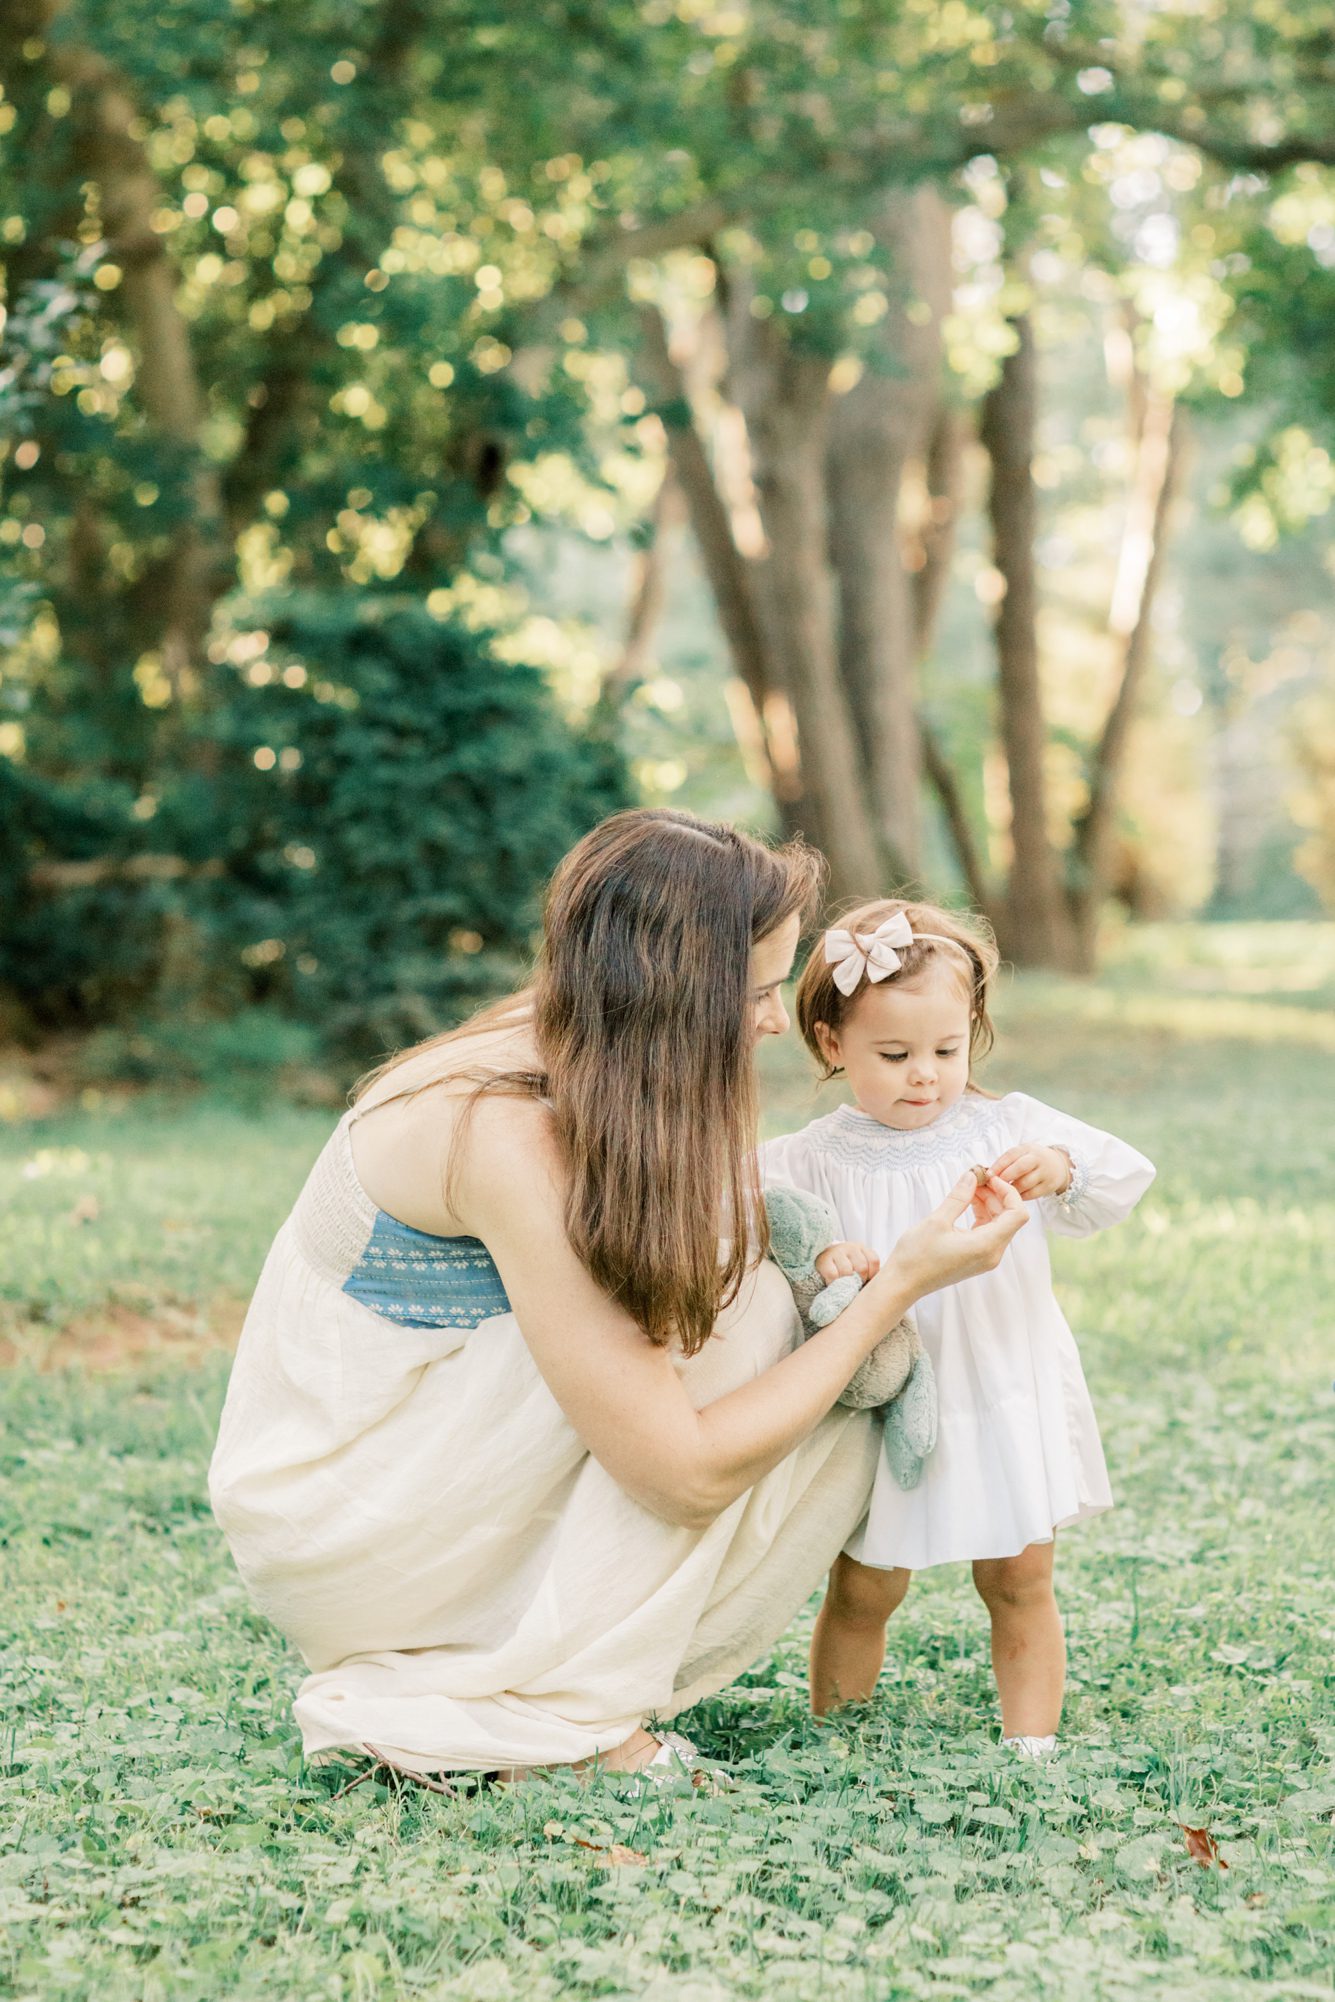 Mom and daughter exploring together during family session. Photo by LRG Portraits.